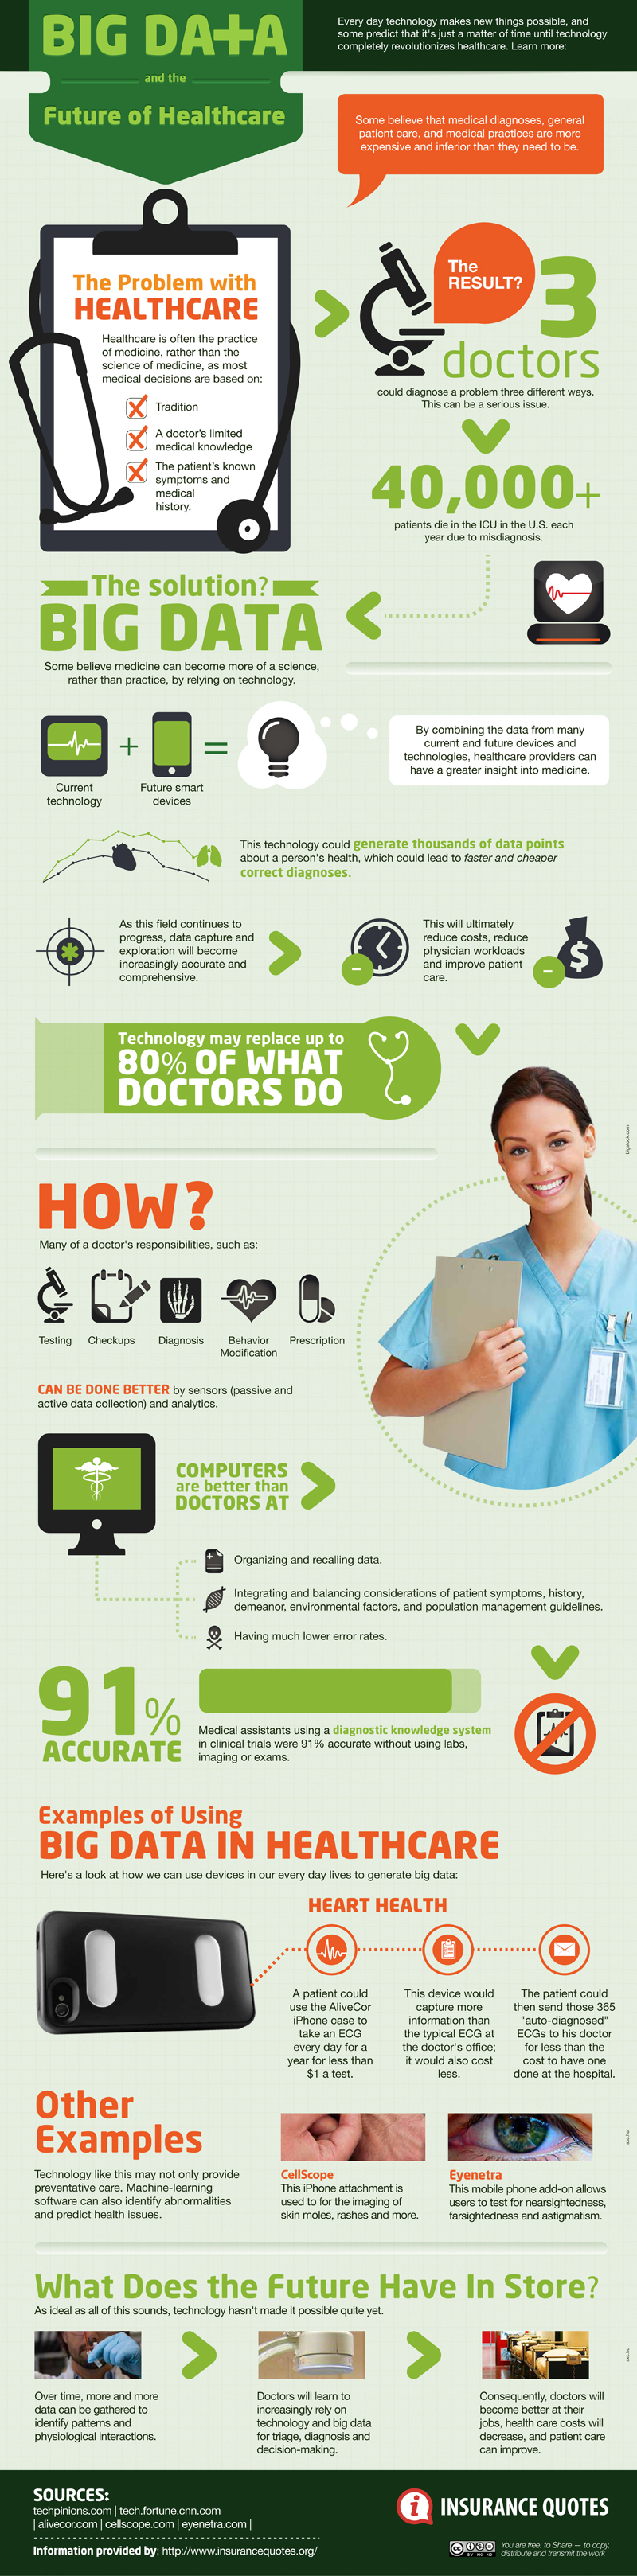 InfoGraphic of Big Data in Healthcare